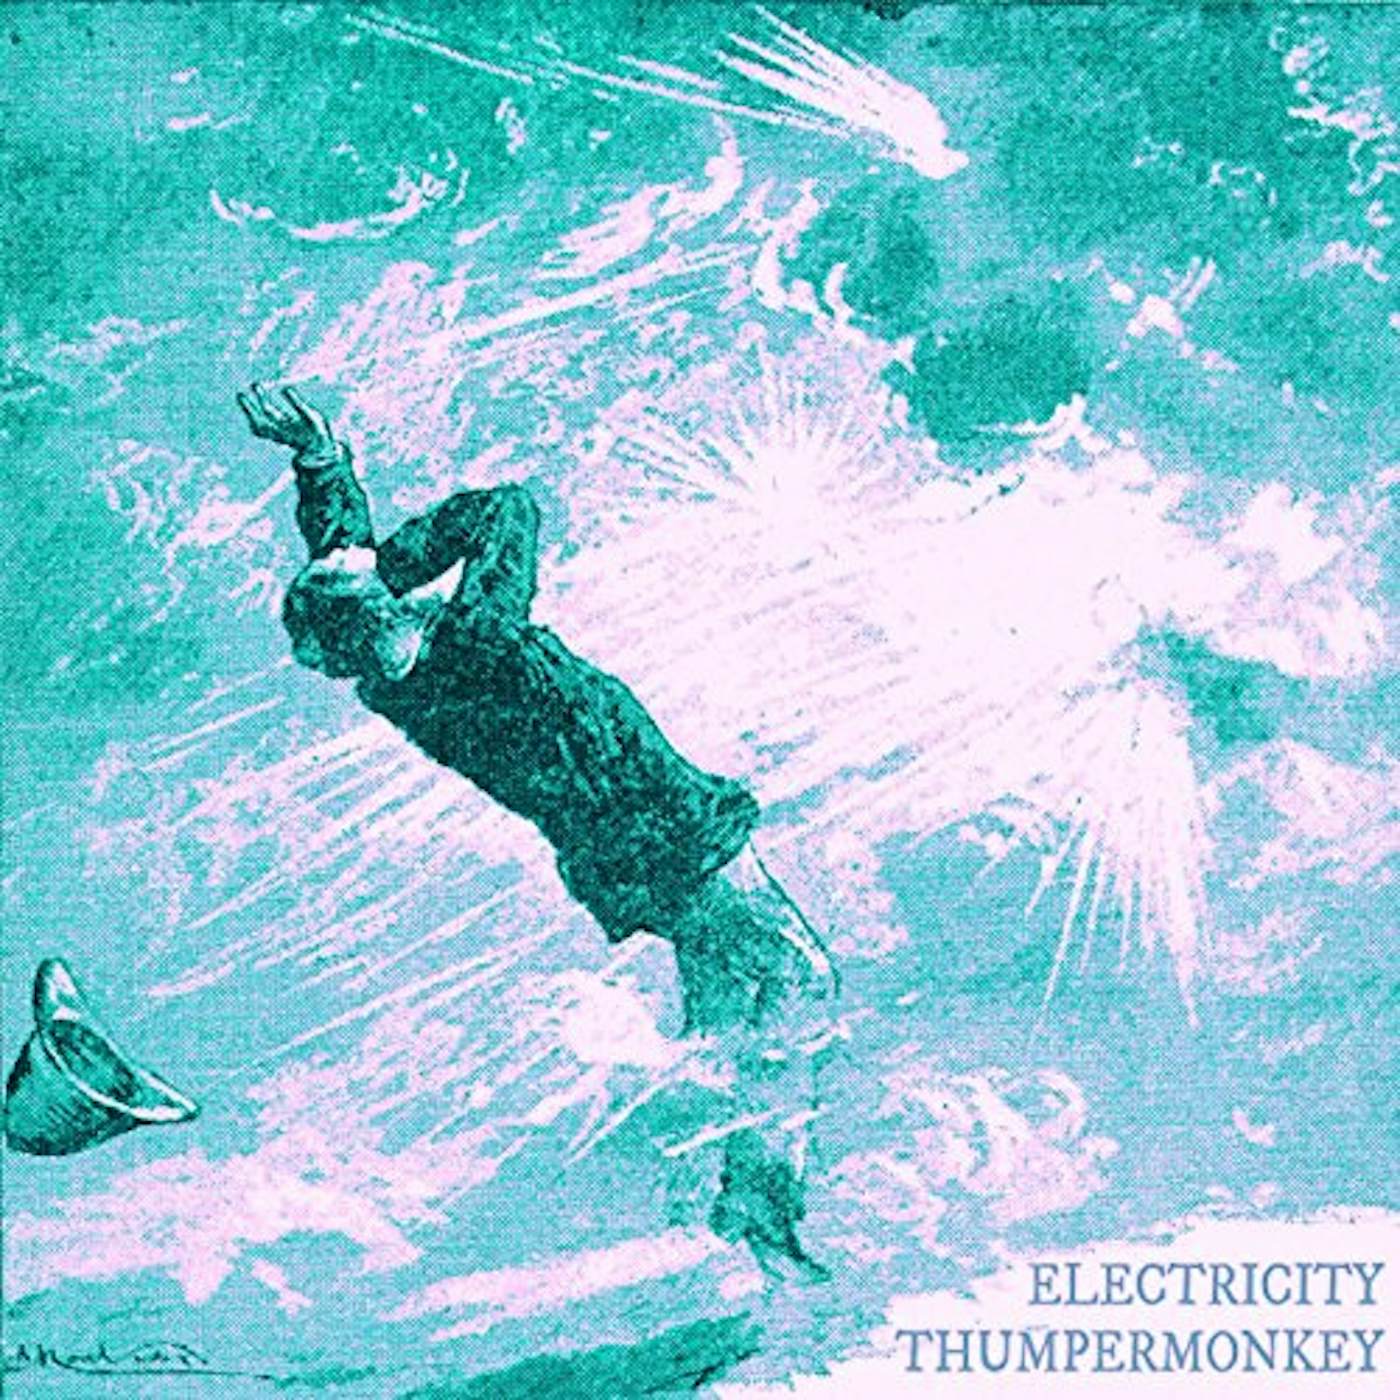 Thumpermonkey ELECTRICITY CD